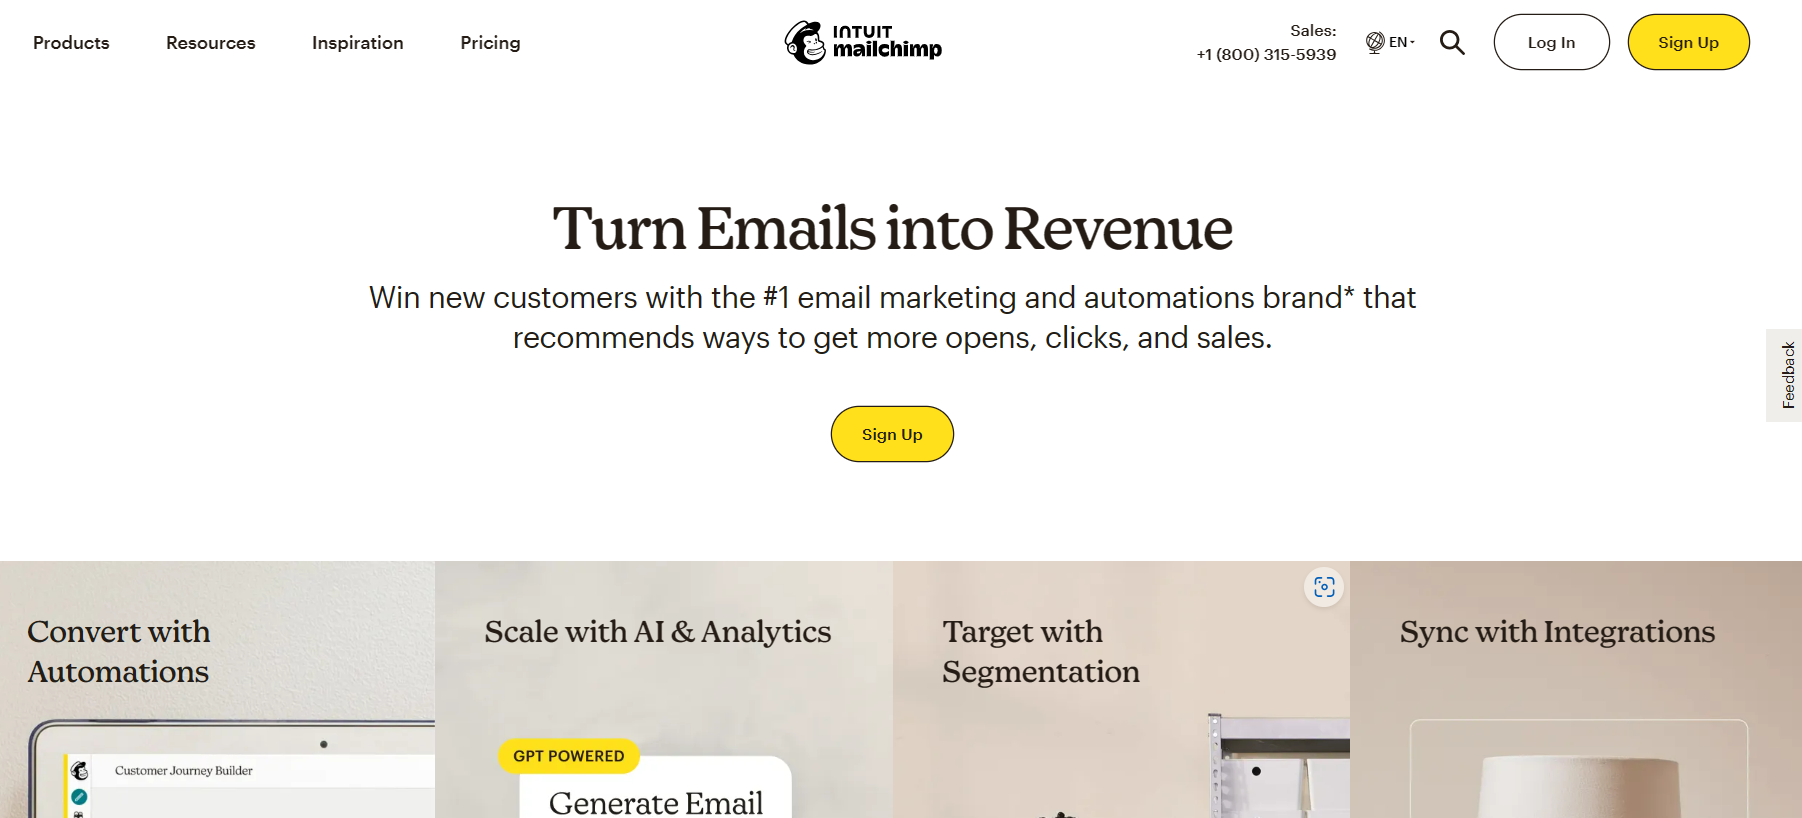 FloDesk vs Mailchimp: Comparing Features and Capabilities of Email Marketing Platforms